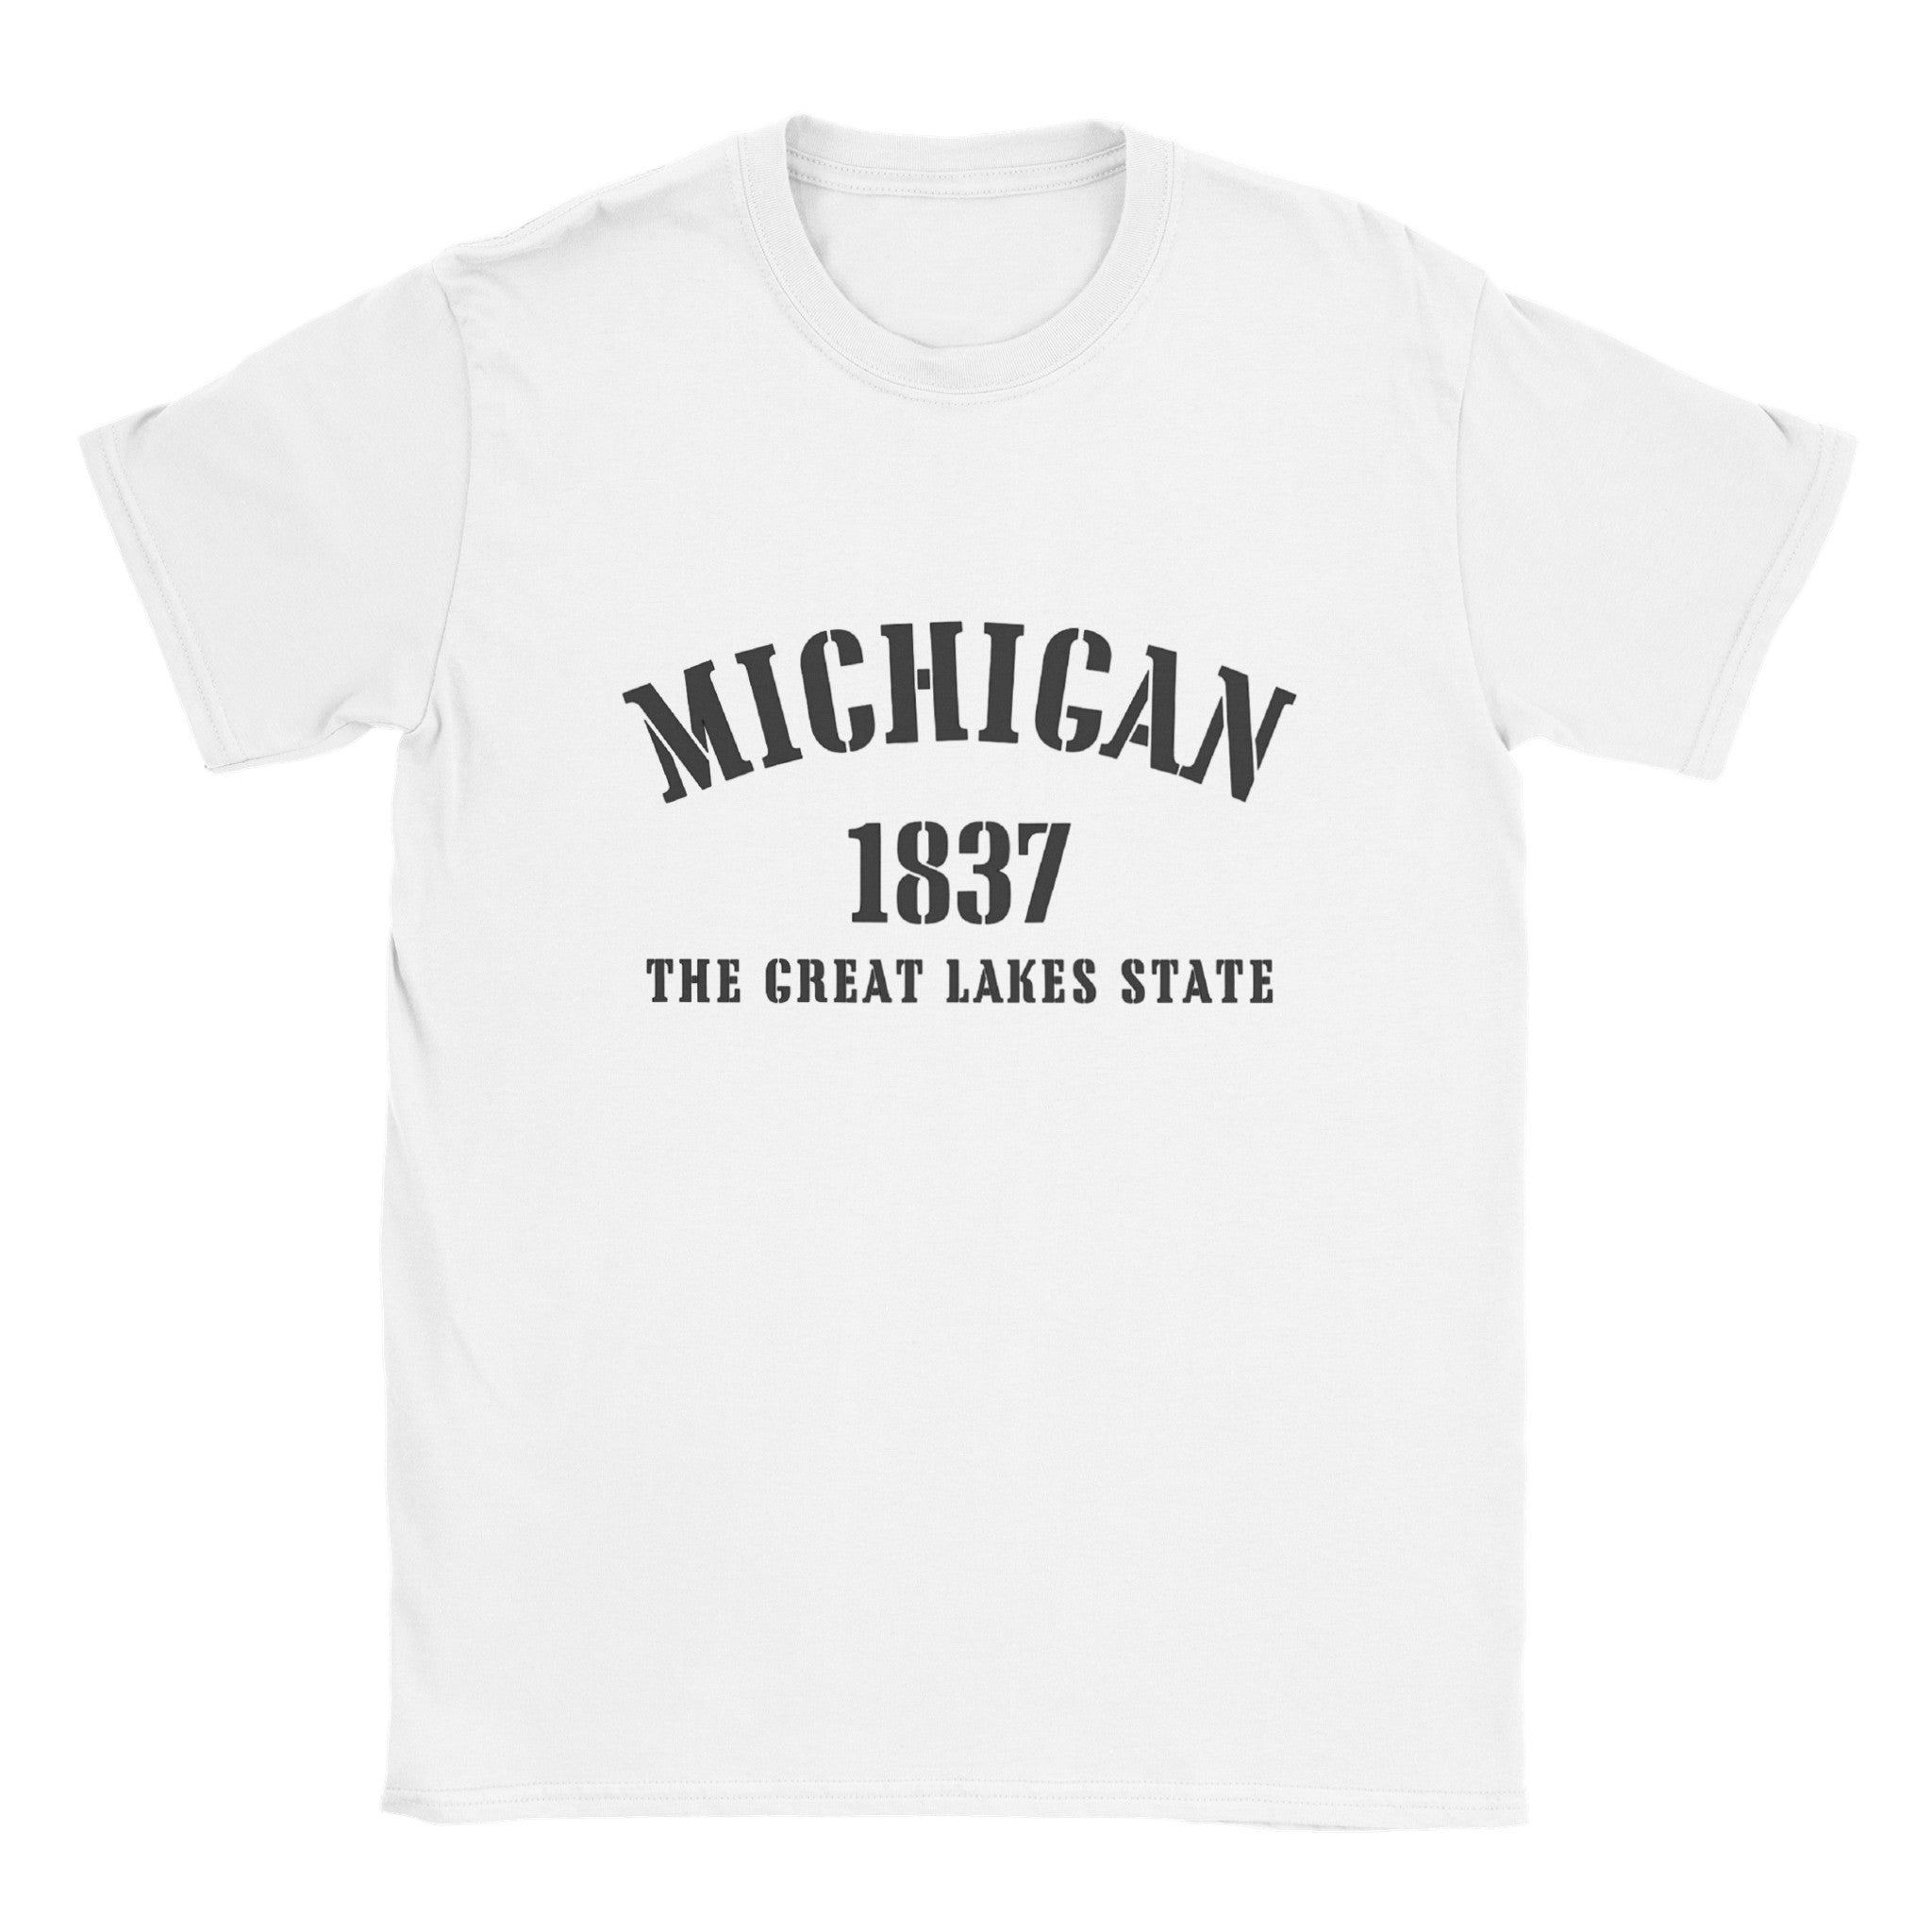 Michigan- Classic Unisex Crewneck States T-shirt - Creations by Chris and Carlos